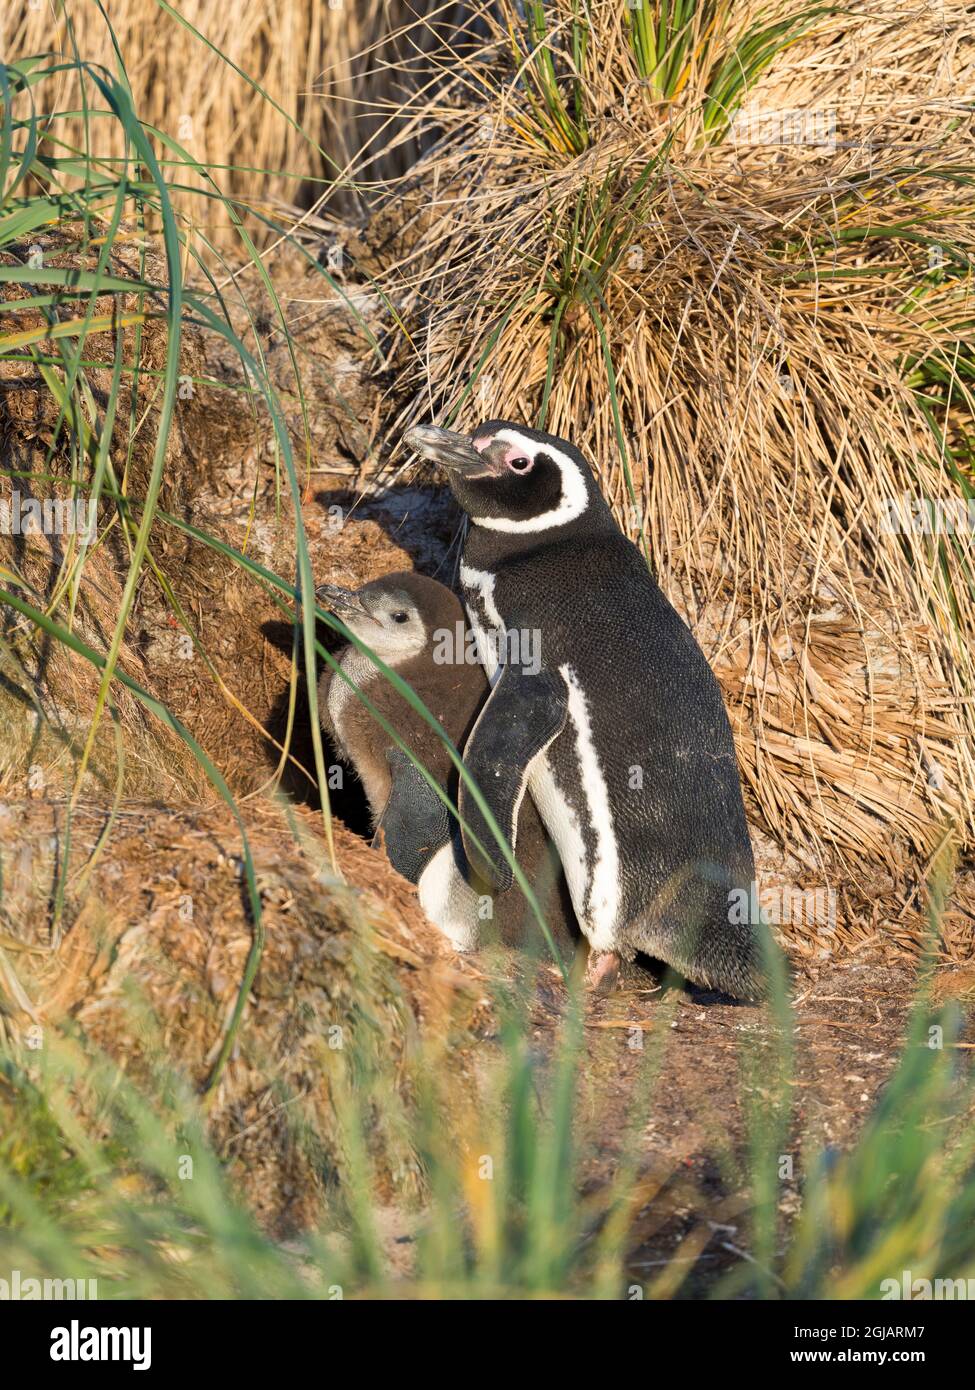 Magellanic Penguin with chick. Breeding area in the tussock belt, the natural vegetation on Subantarctic islands, Falkland Islands. Stock Photo